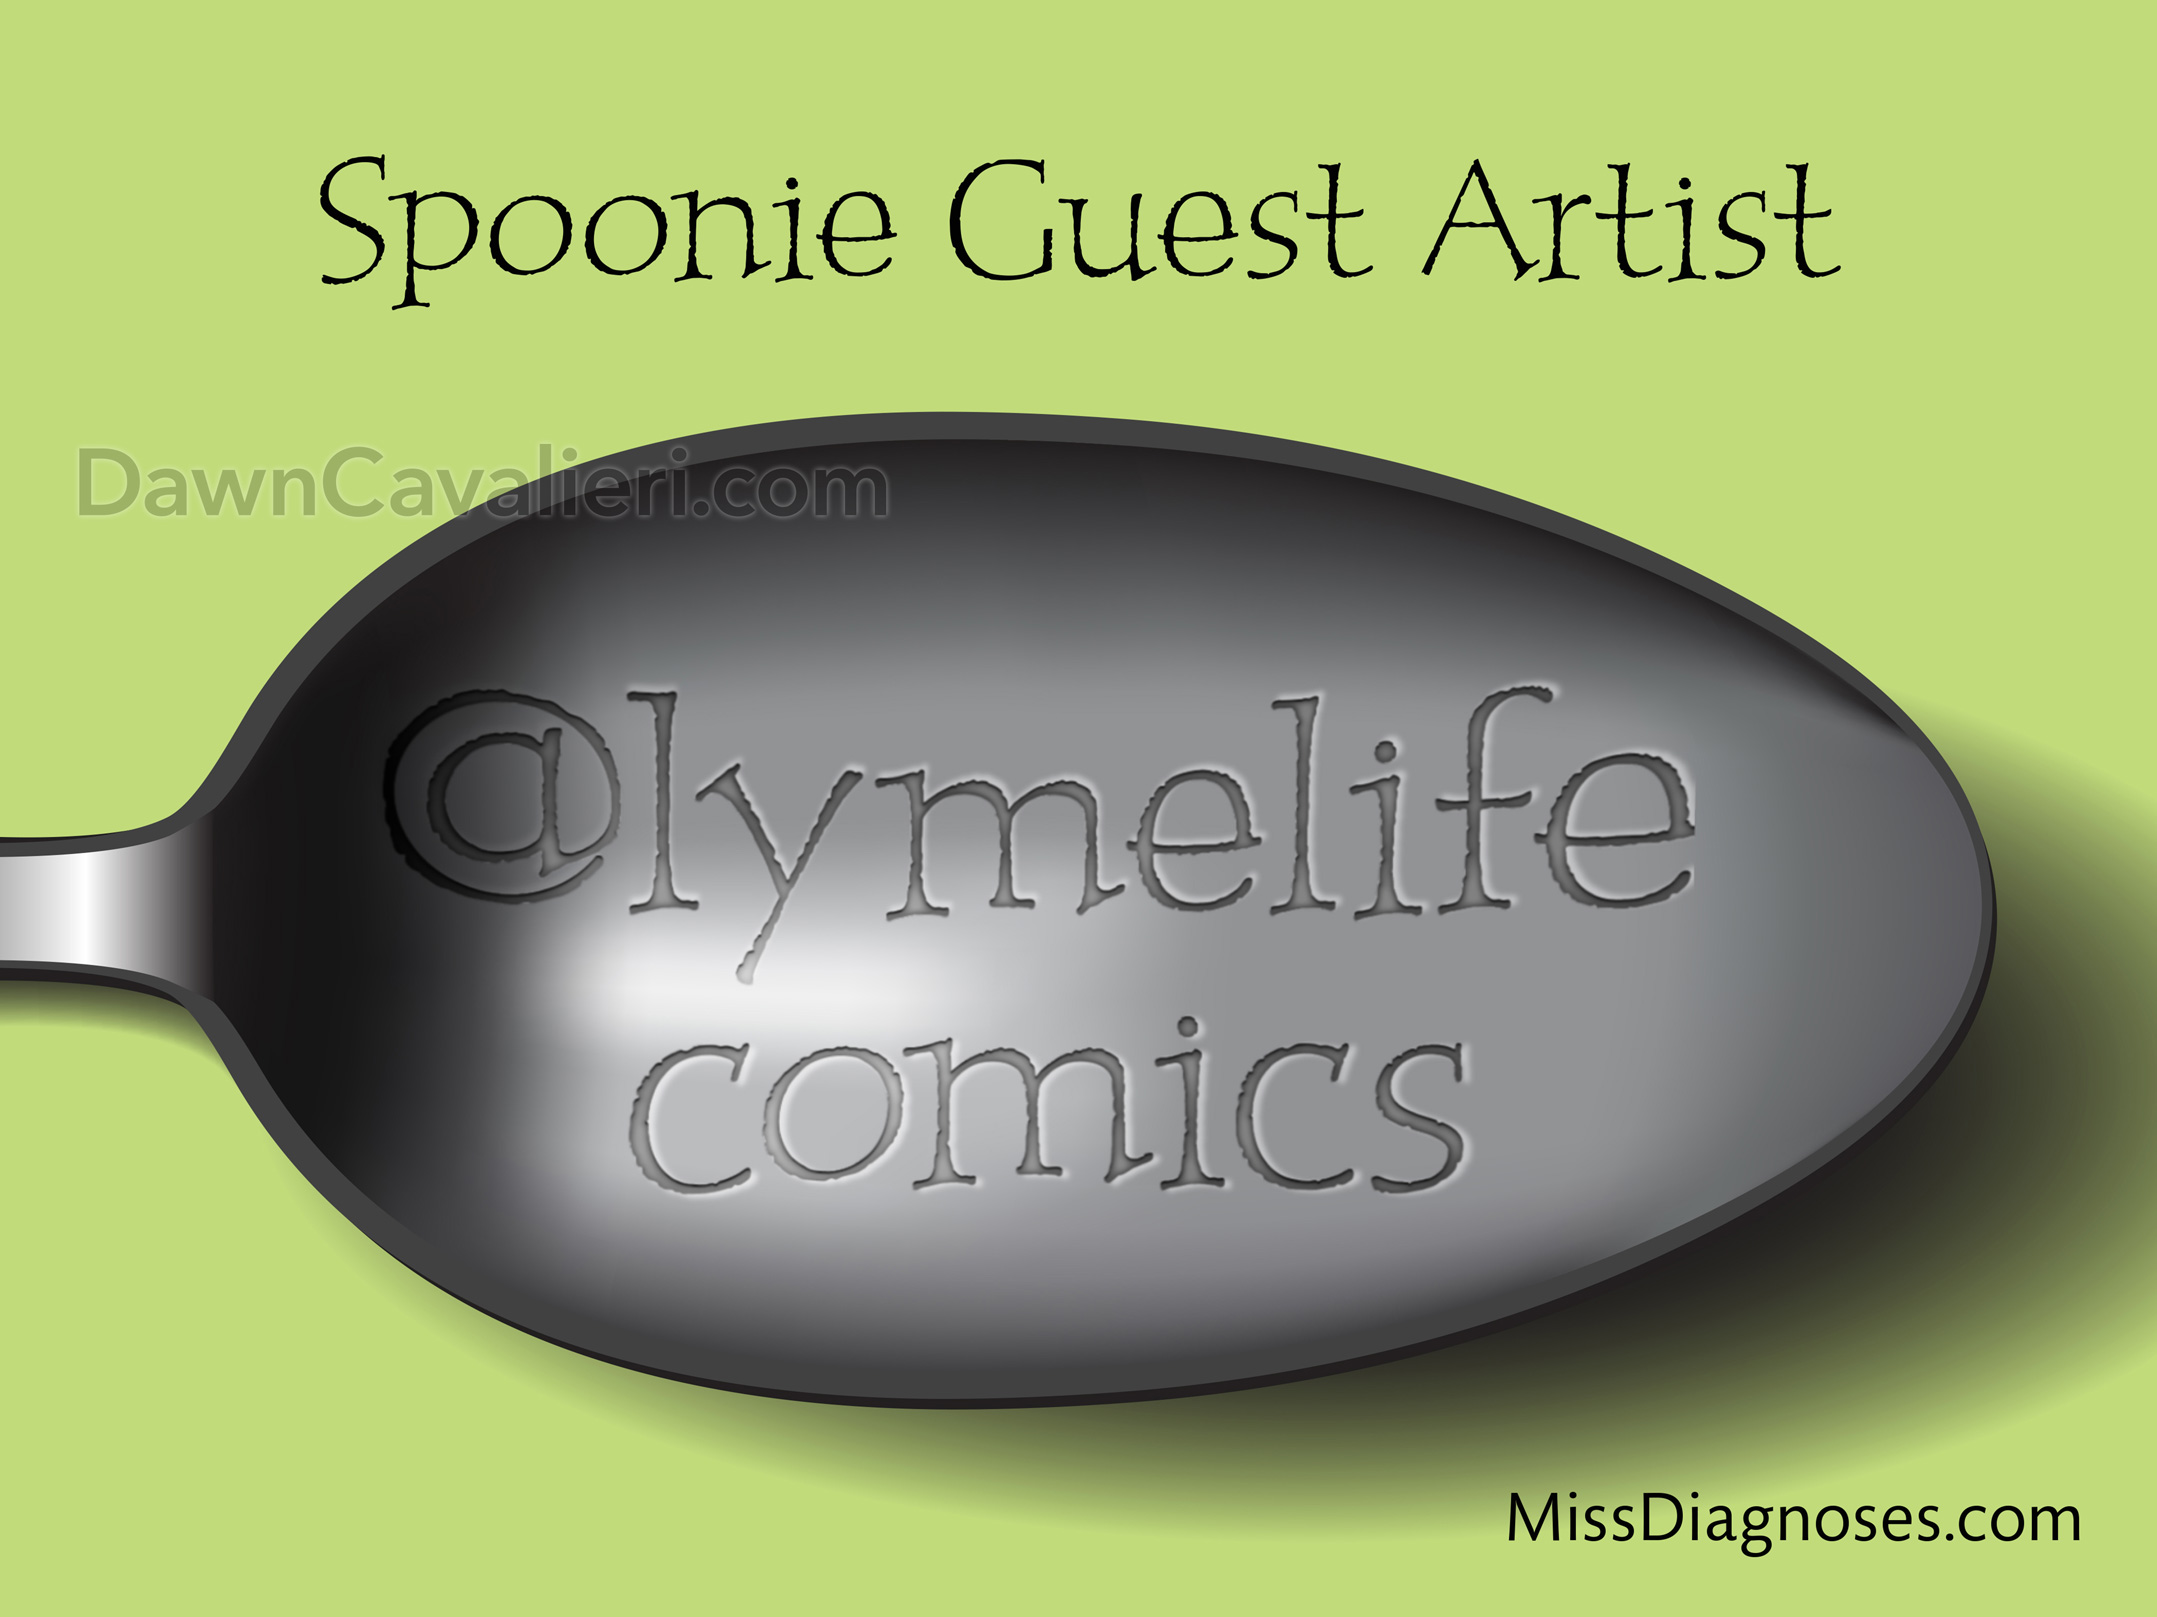 Header image for blog post. The top reads 'Spoonie Guest Artist.' The illustration is of the bowl part of a spoon in silver tones. Running across the bowl, styled to look like engraved type, is the name @lymelifecomics. In the lower right corner of the image is the name of the blog: Miss Diagnoses dot com. The background is lime green. The ratio of the image is roughly 1.3 to 1.